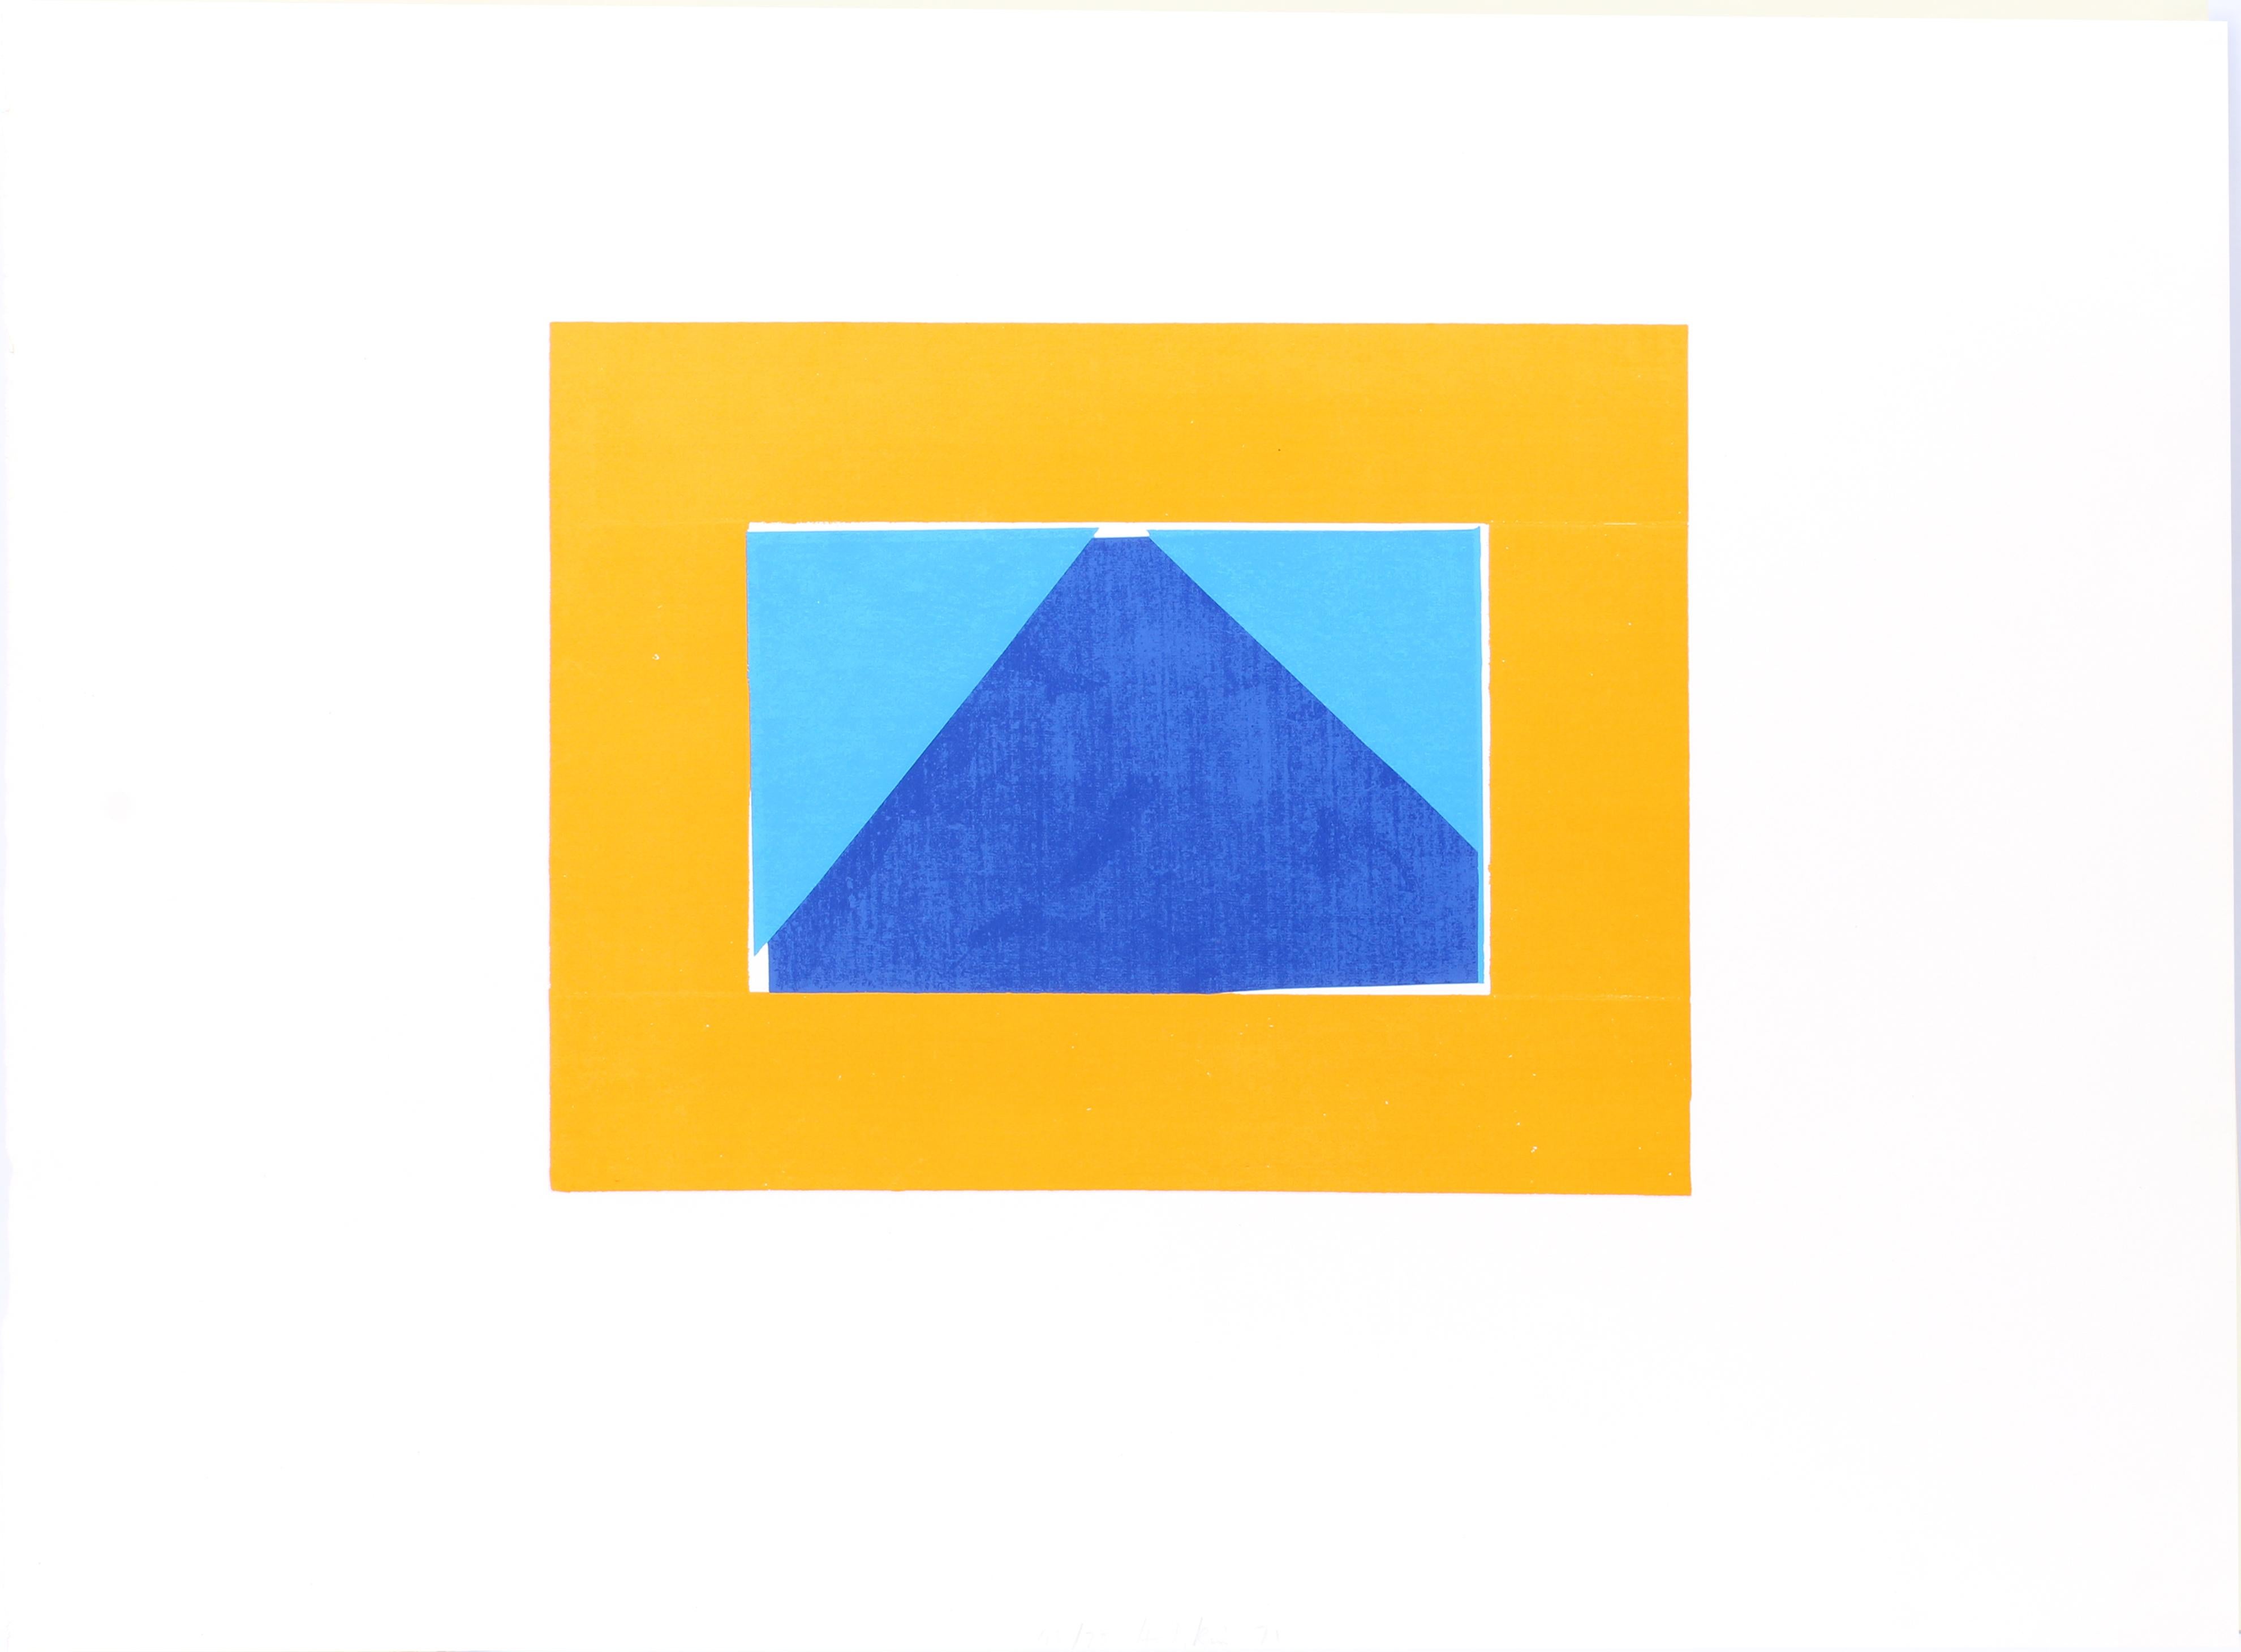 Indian View C, 1971
Screenprint in colors
22 4/5 × 30 7/10 in
58 × 78 cm
Edition 1/75 + 1AP

Howard Hodgkin became a prominent figure in British art in the 1970s for painting on wooden supports such as drawing boards and door frames instead of